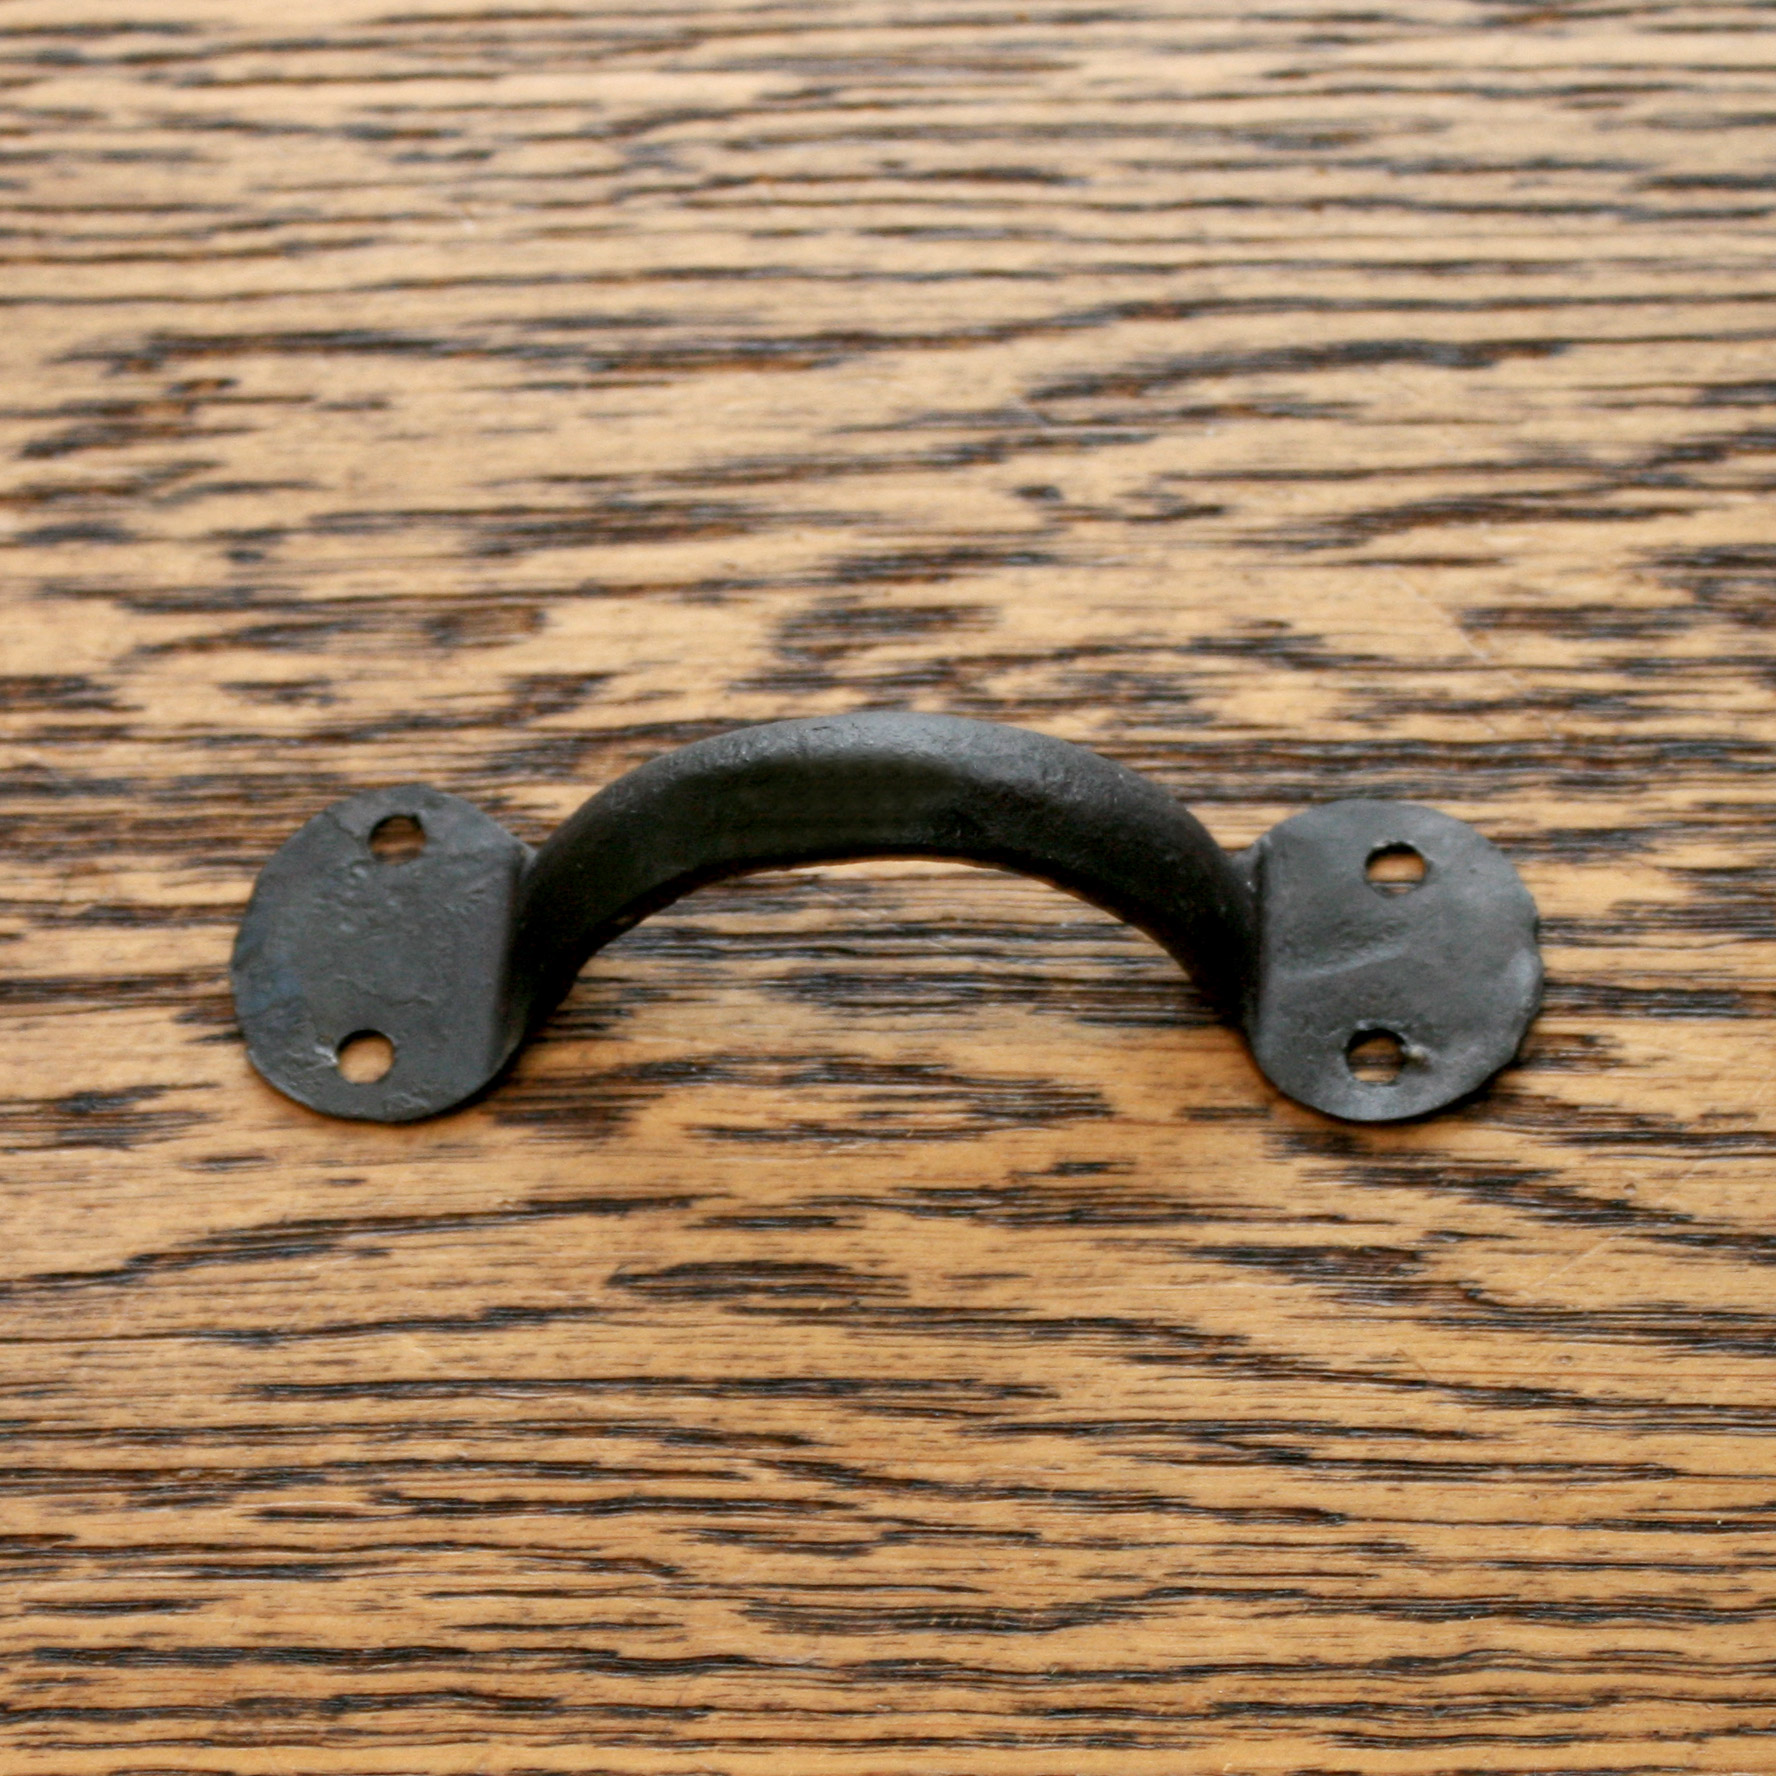 Cabinet Fittings The Rustic Merchant, Cast Iron Cabinet Handles Uk